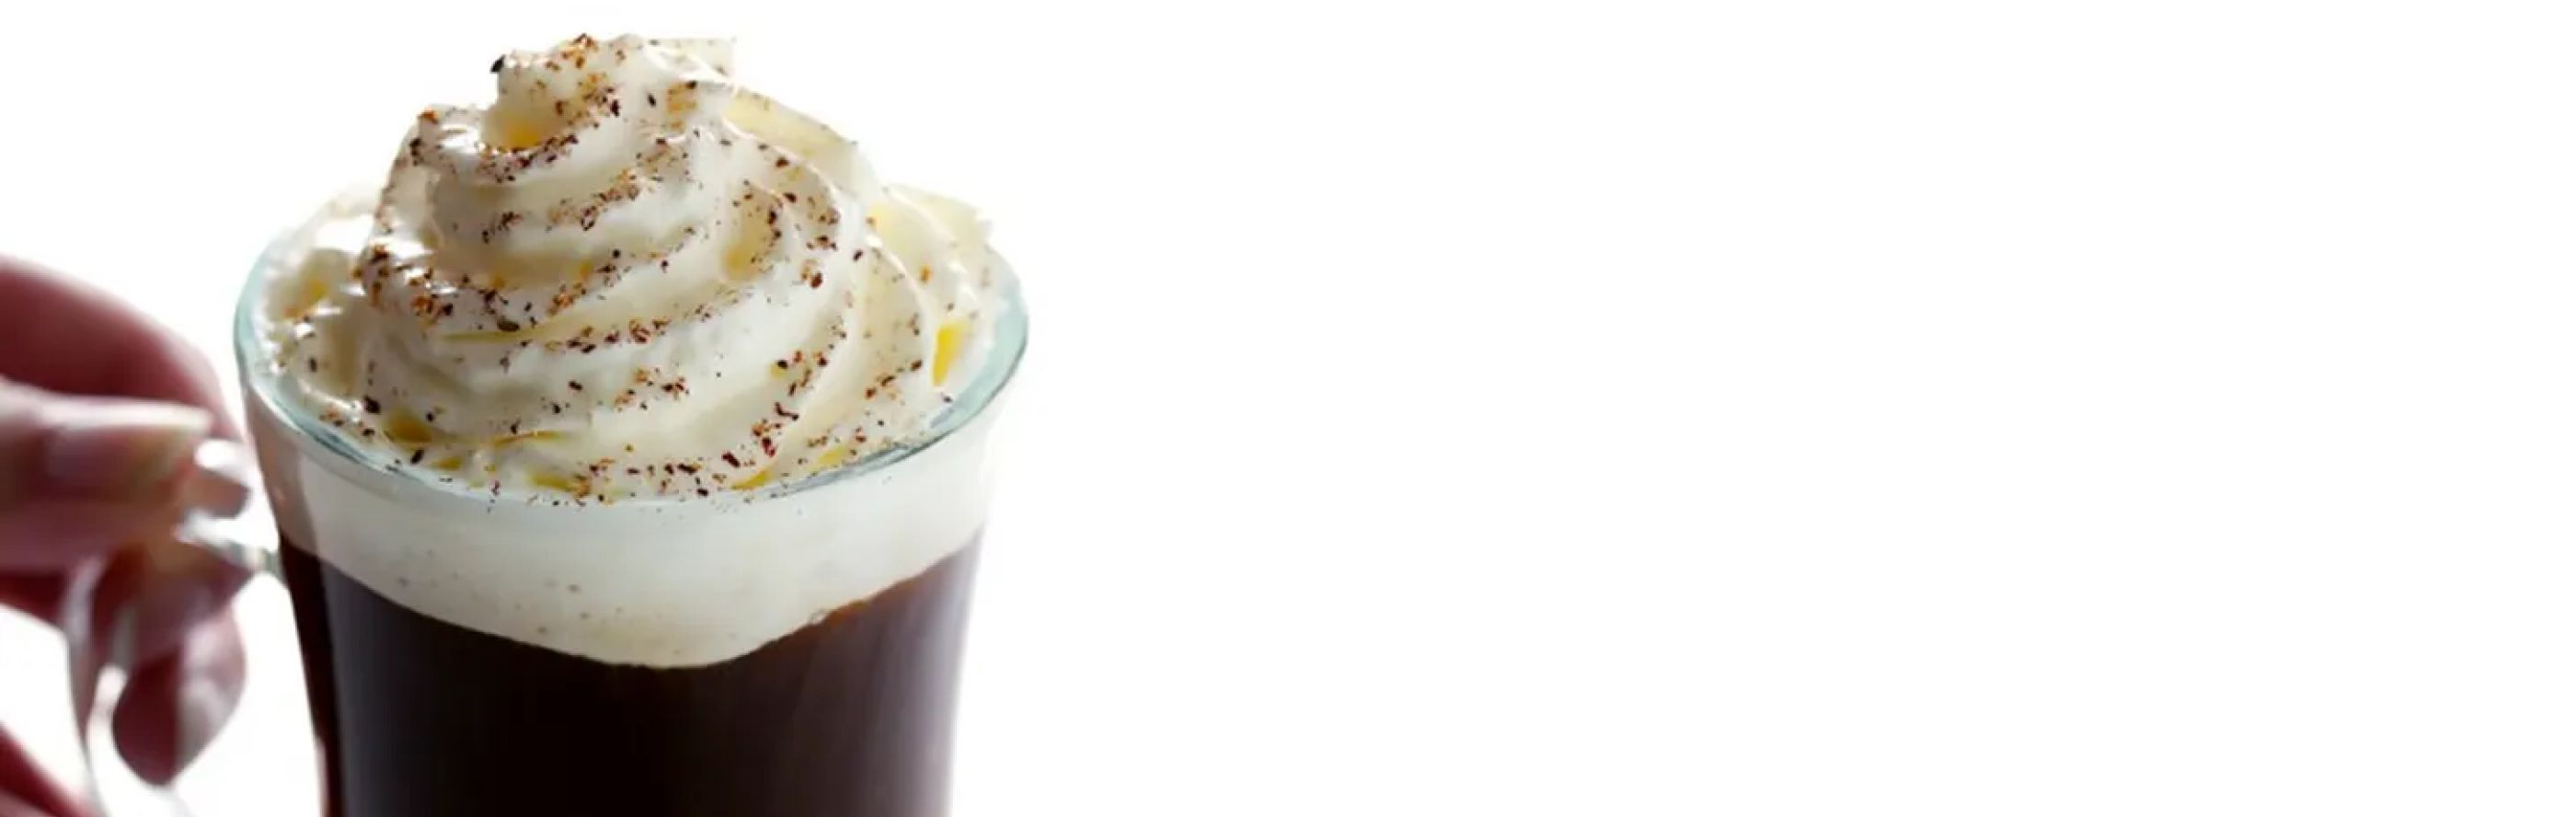 Irish coffee topped with whipped cream and chocolate flakes